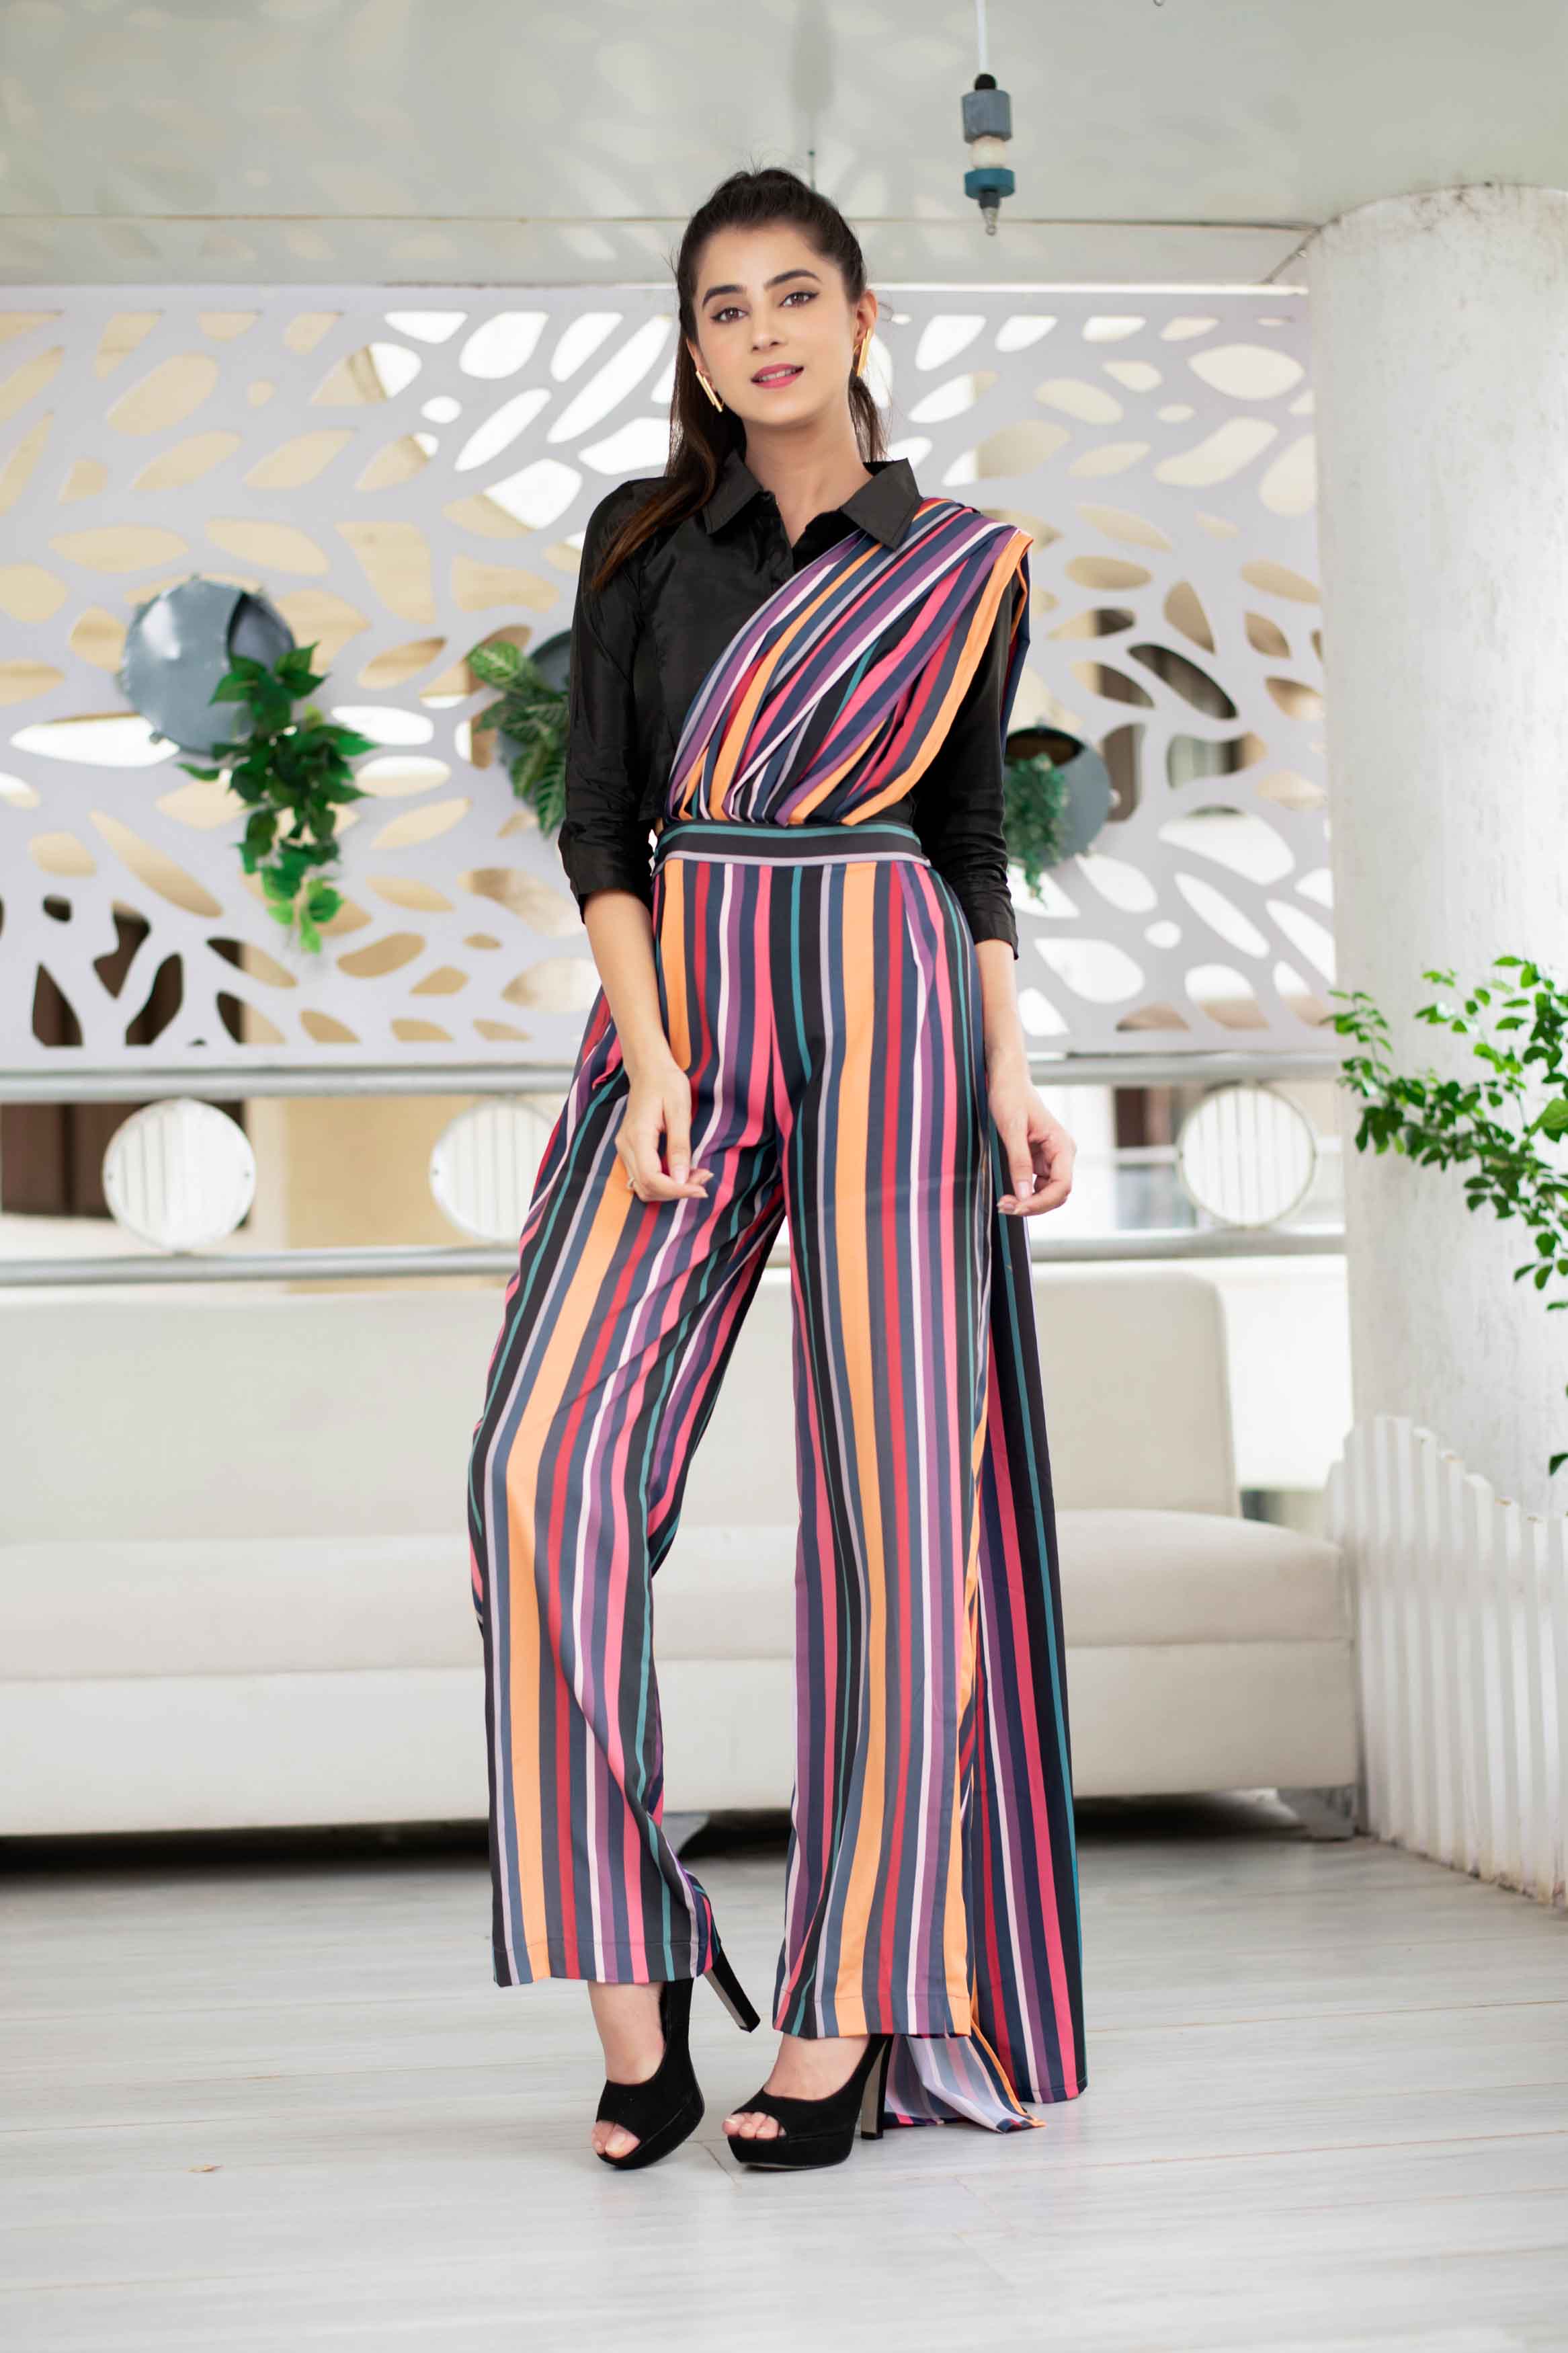 Women's Stripped Pant With Attached Dupatta And Top Set - Label Shaurya Sanadhya